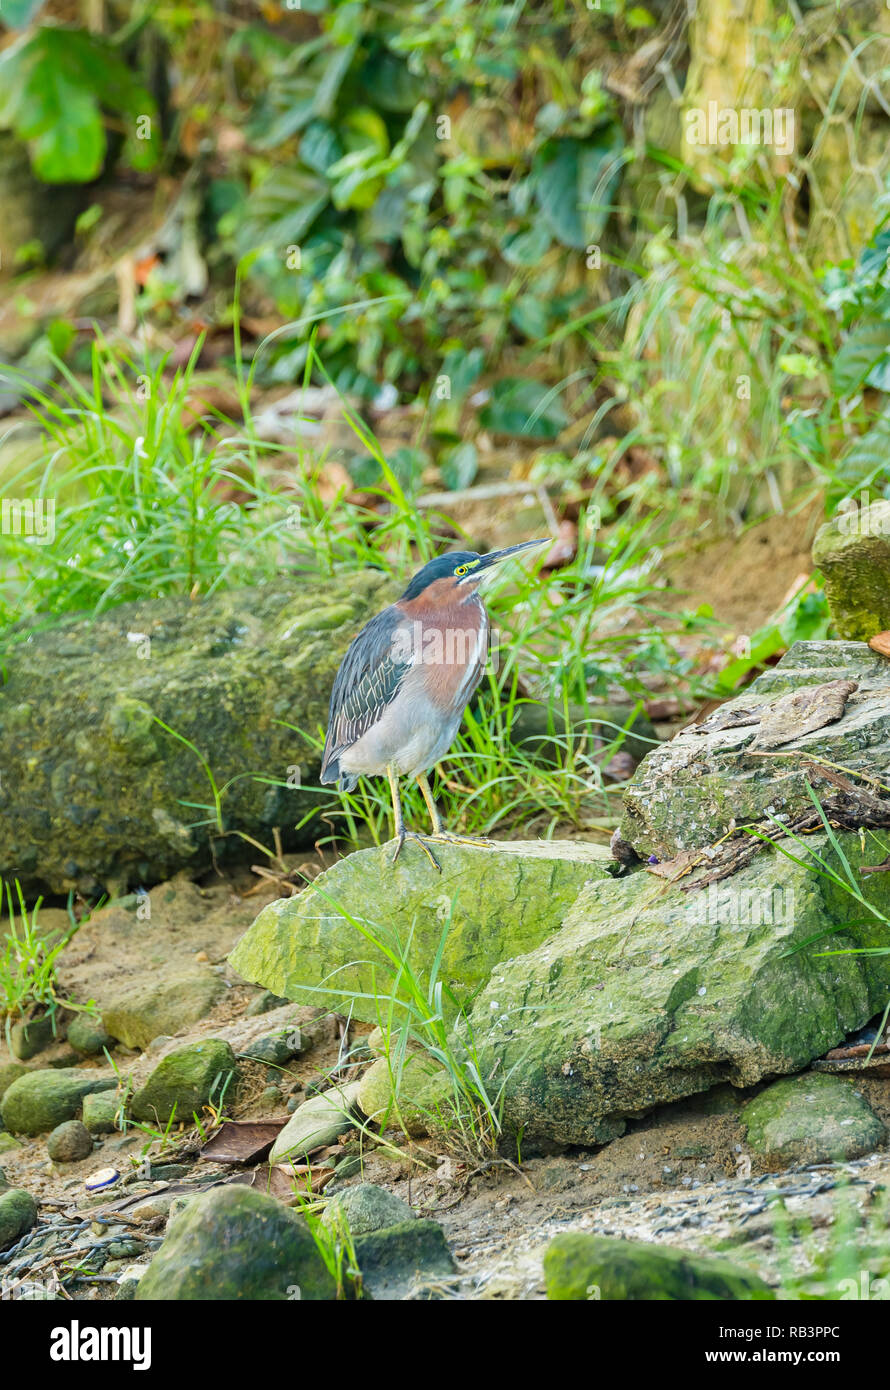 Heron (Butorides virescens) Green backed heron facing right, poised for fishing in fresh water creek in the small fishing village of Castara, Tobago Stock Photo